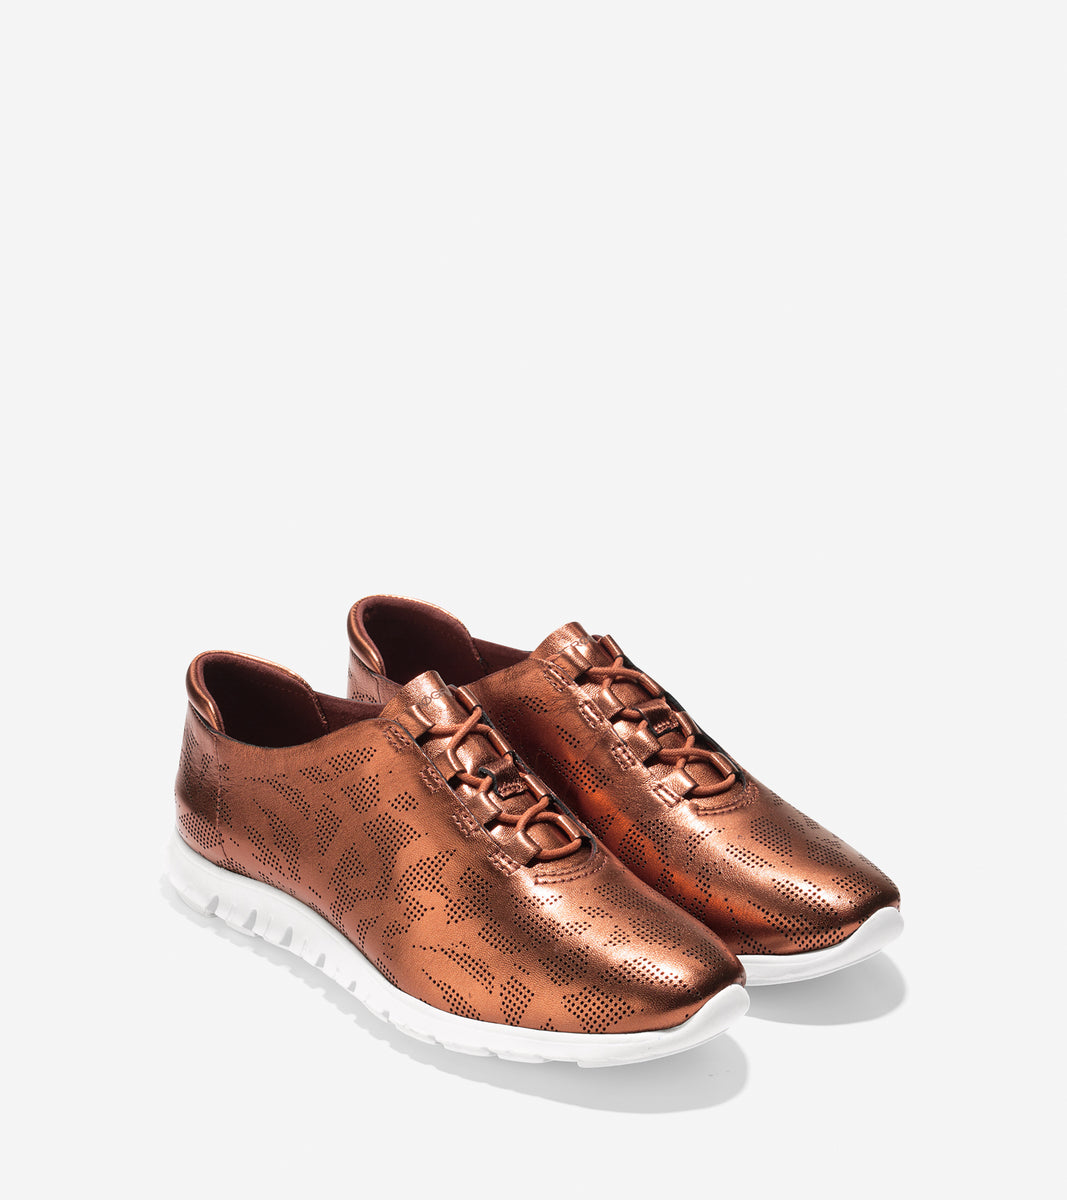 ColeHaan-ZERØGRAND Perforated Trainer-w04243-Deep Copper Perf Leather-optic White